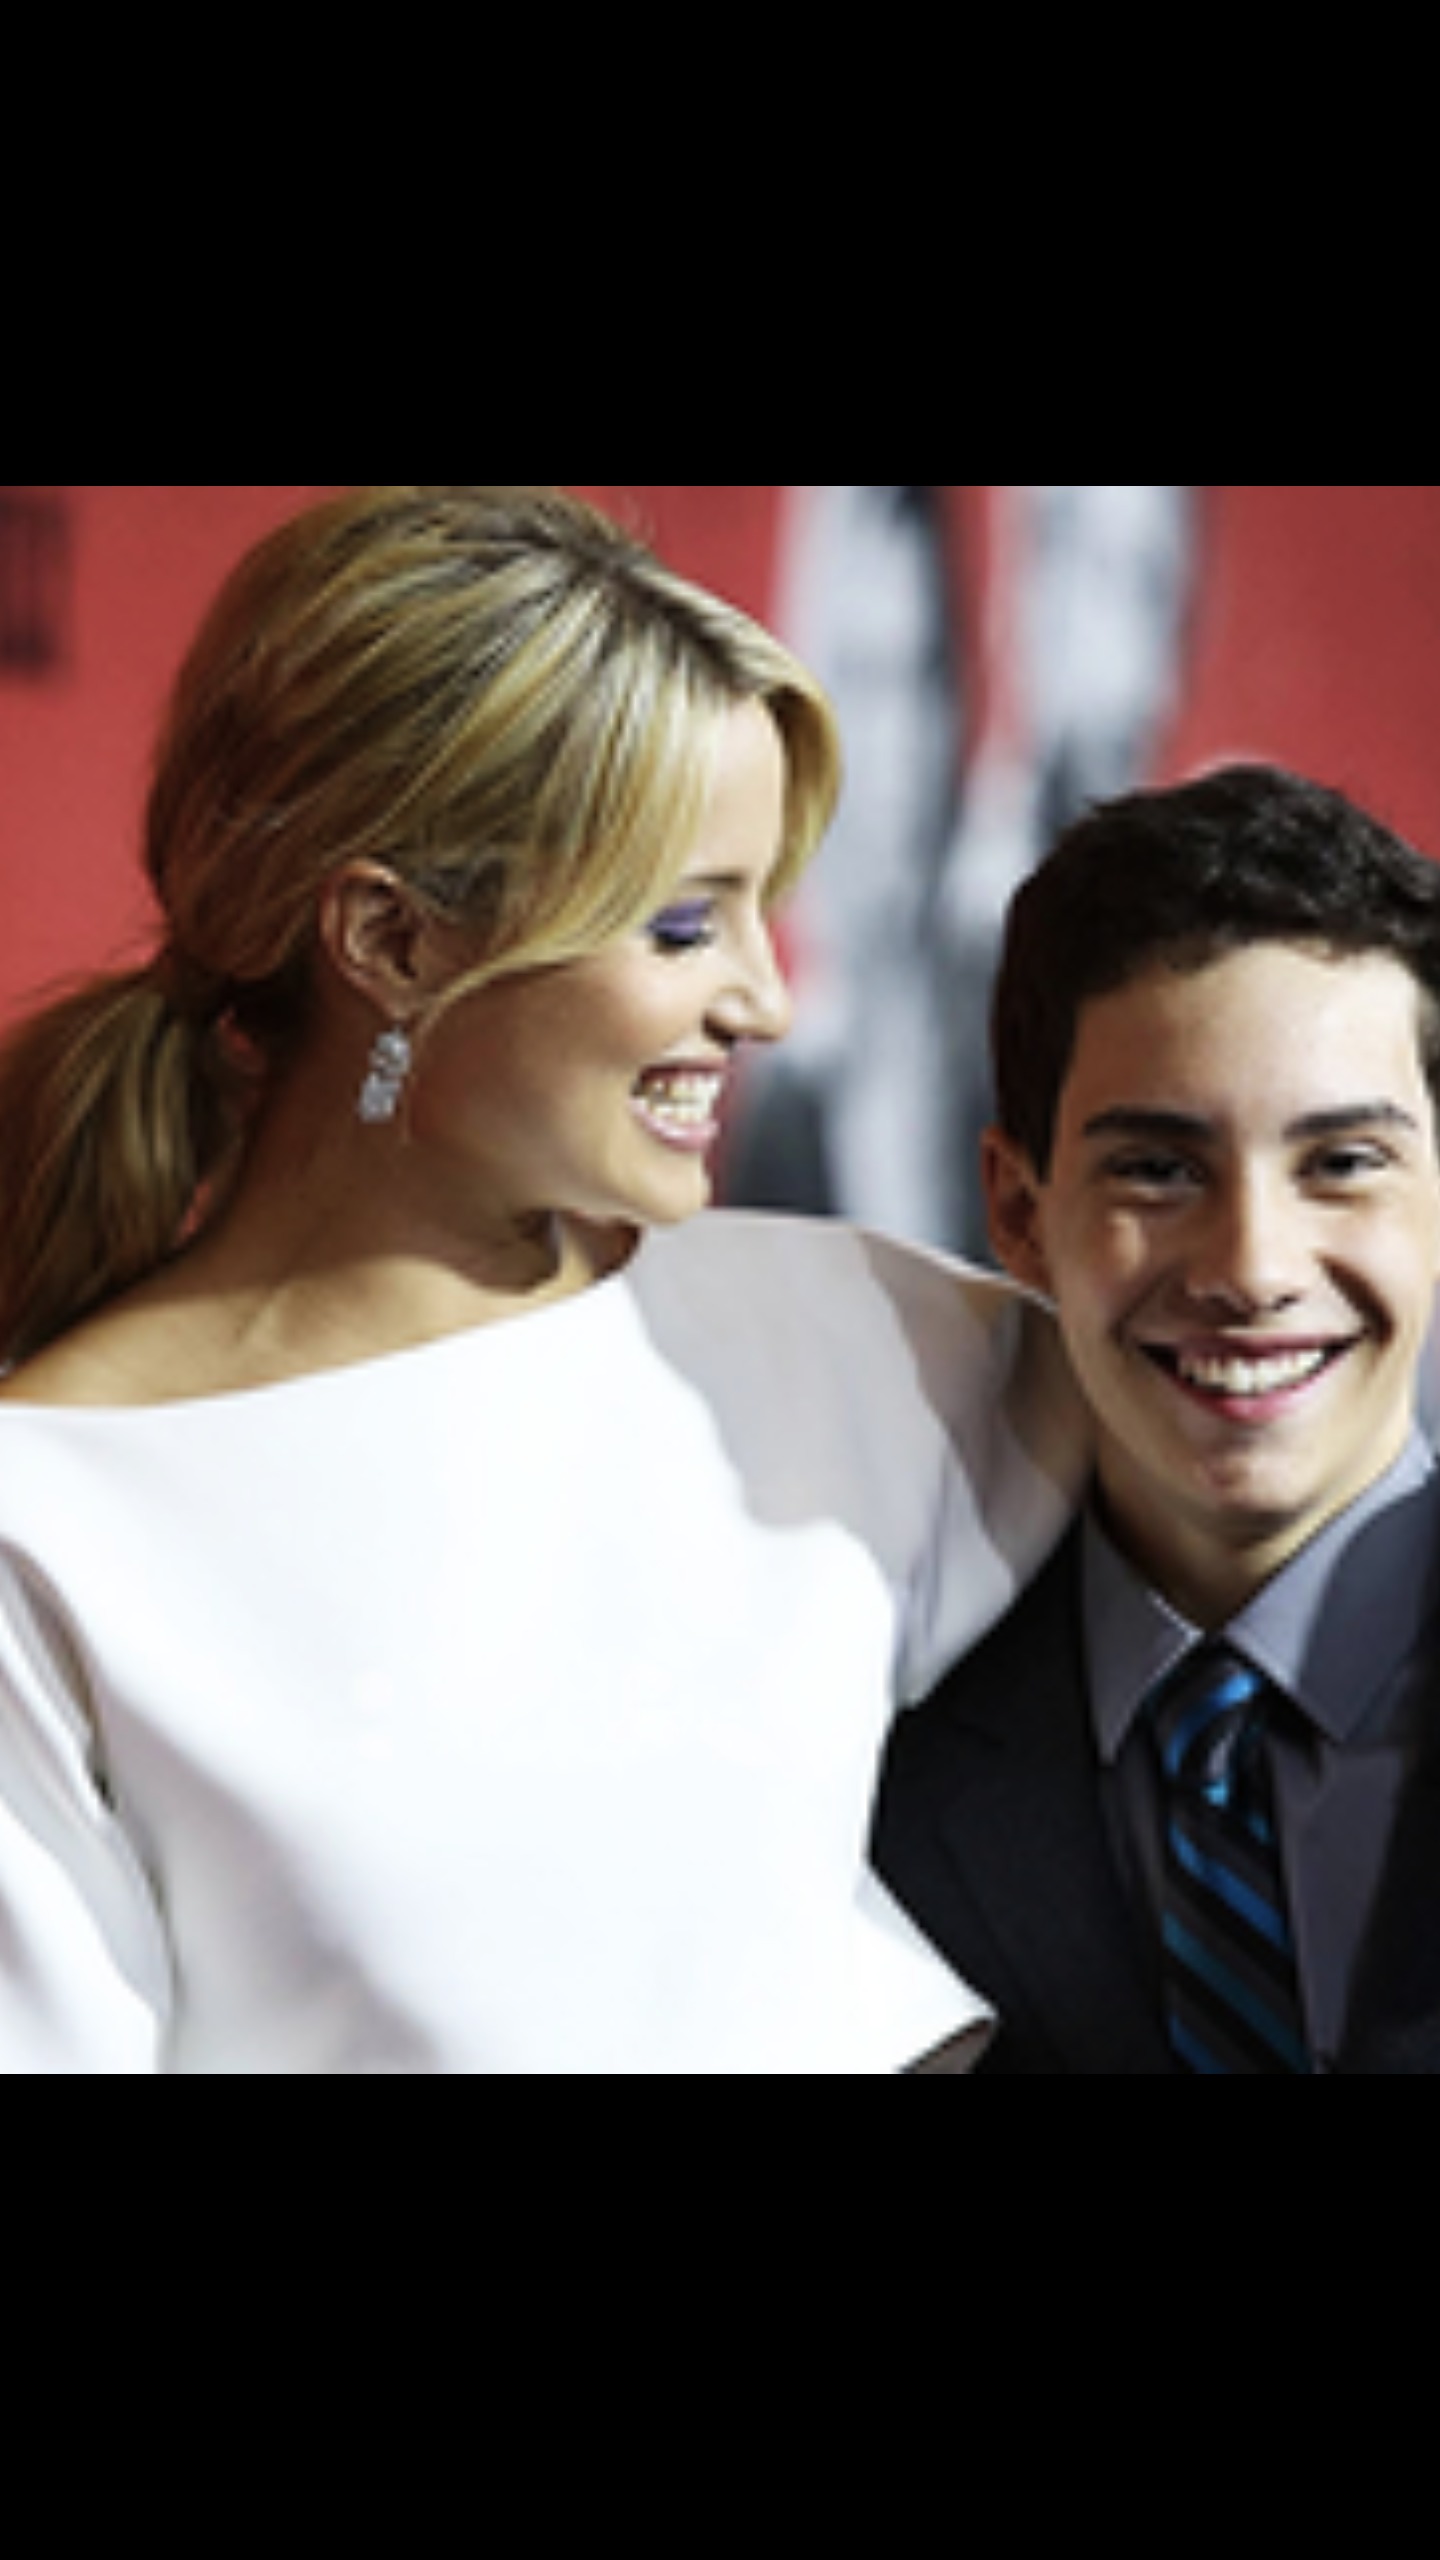 John D'Leo and Diana Agron on the red carpet at the premiere of 